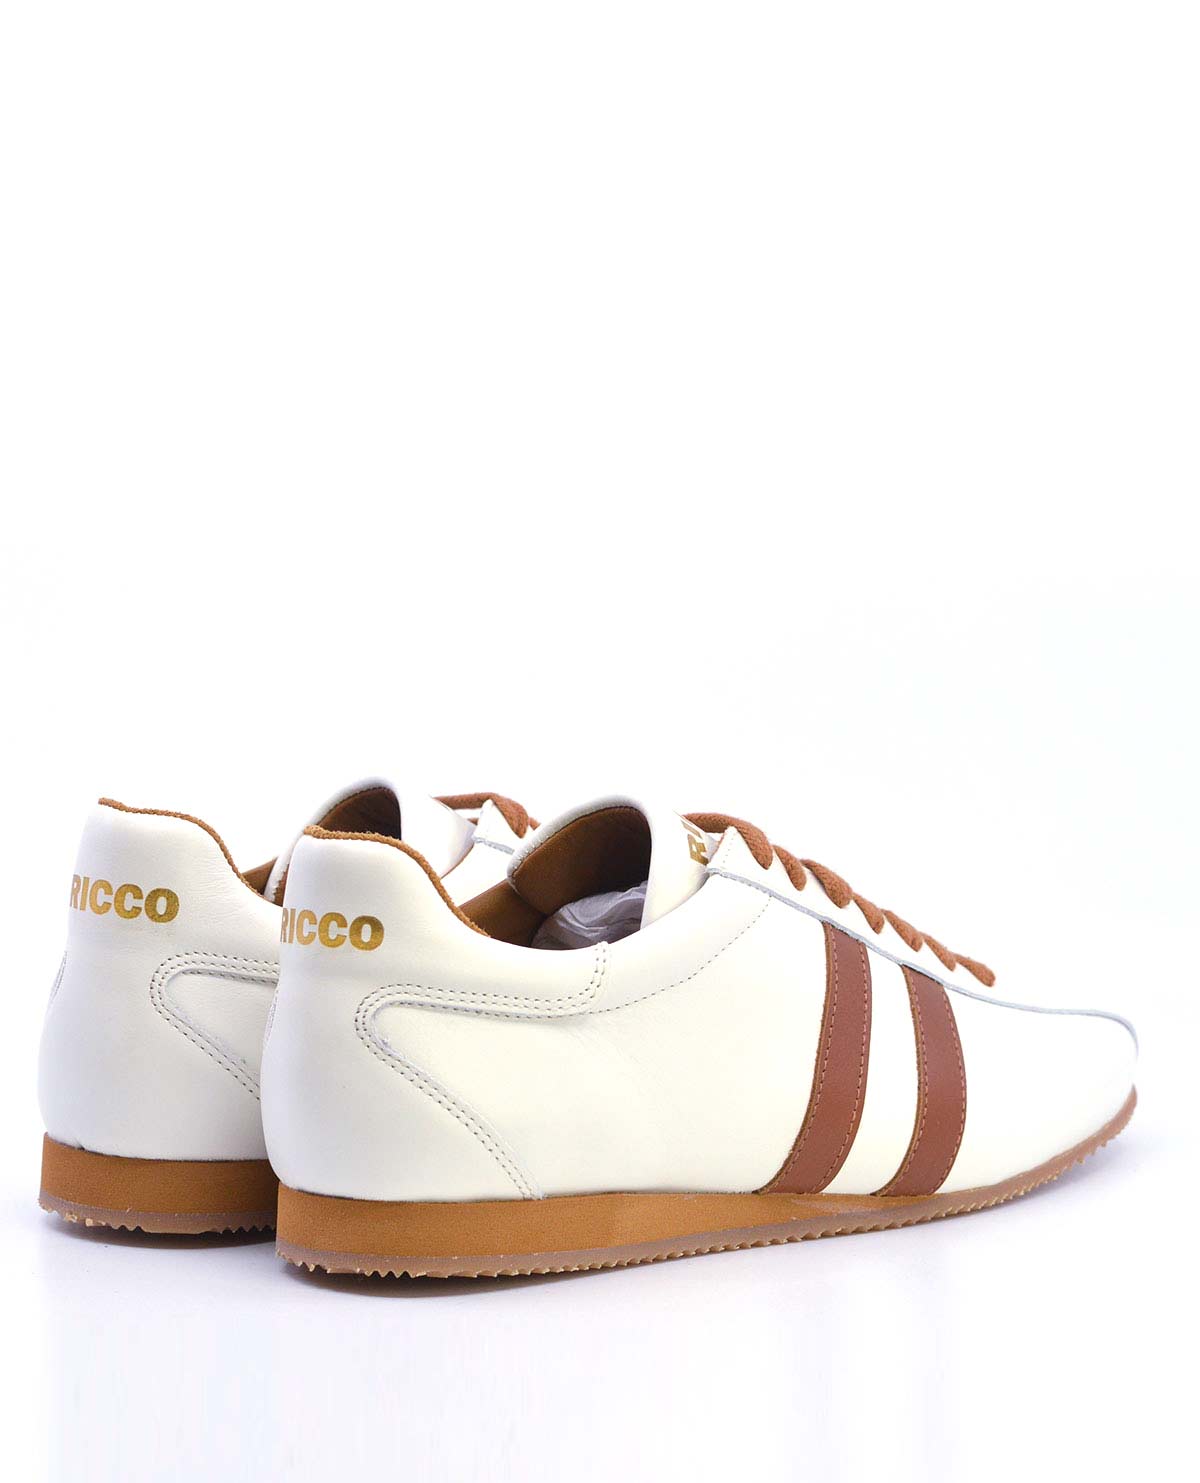 The Ricco in White Leather & Blue Red Strip - Old School Trainers